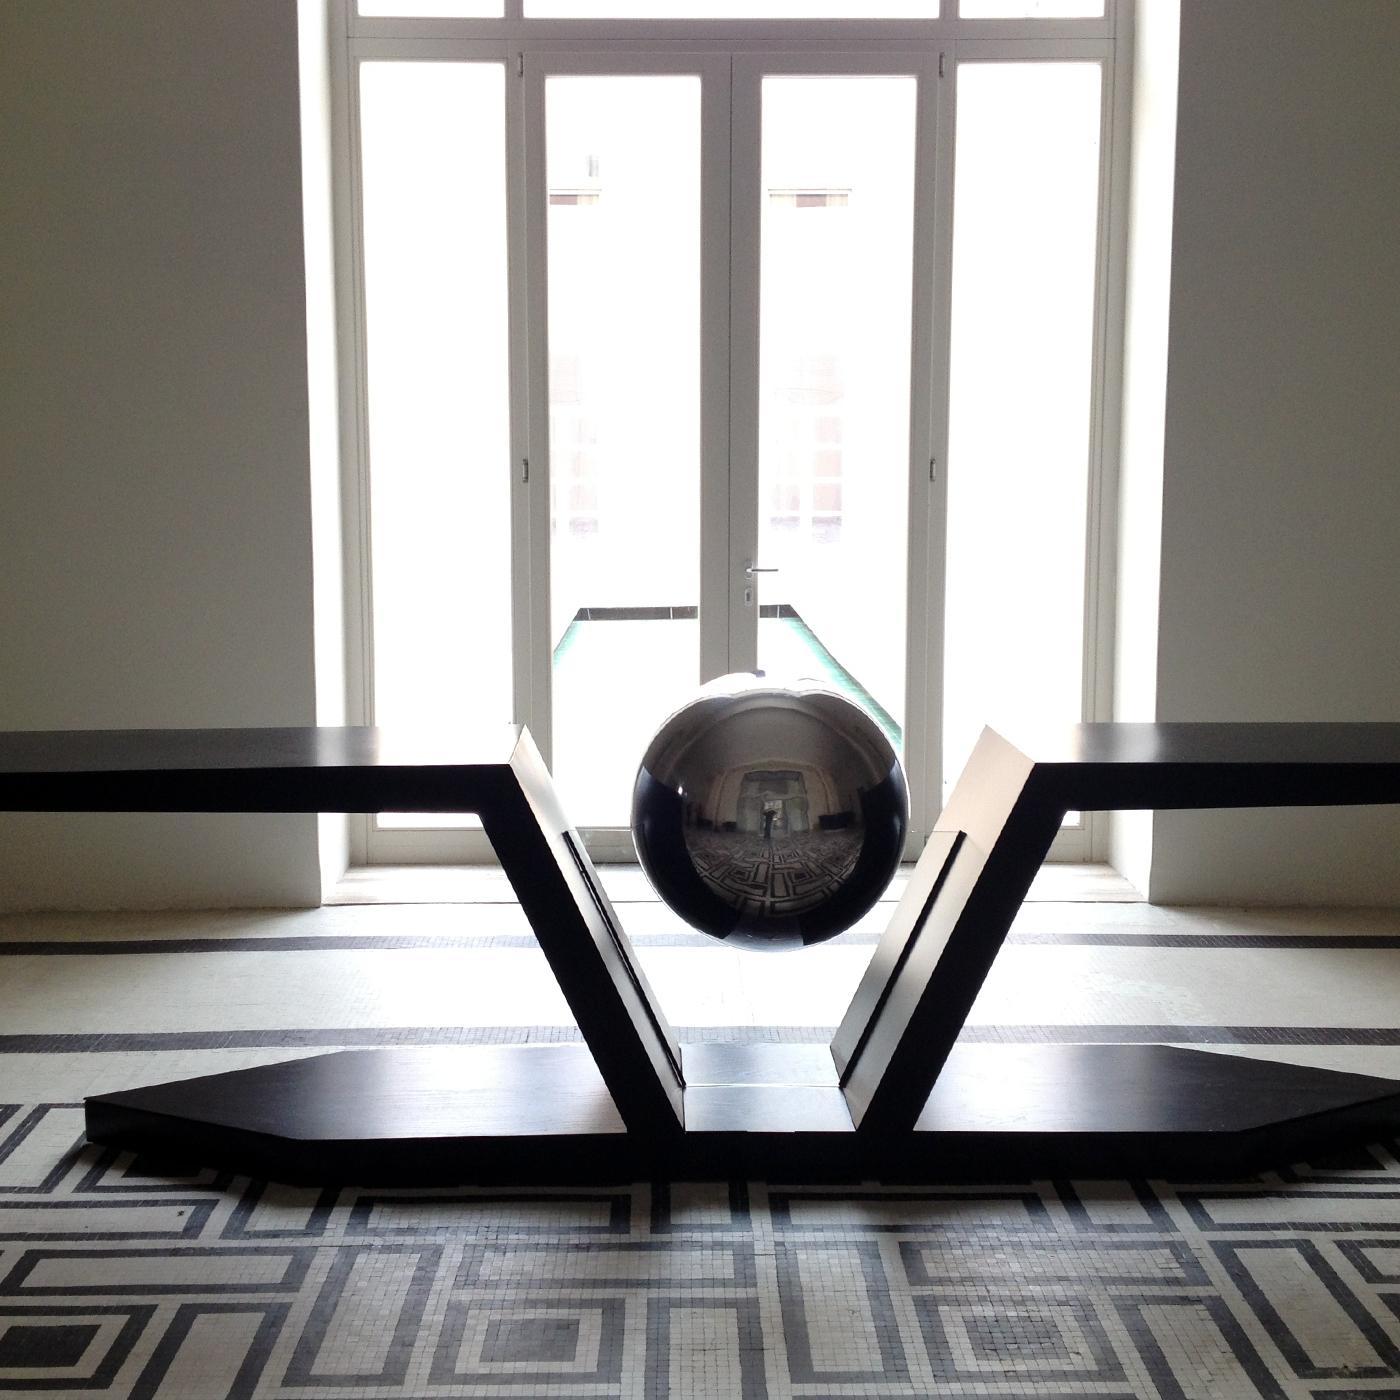 Inspired by Hermes - a herald and messenger of the Olympian gods in Greek mythology - this console astonishes with its winged design distinguished by a central steel sphere seemingly floating in mid-air. The sculptural structure incorporates glass